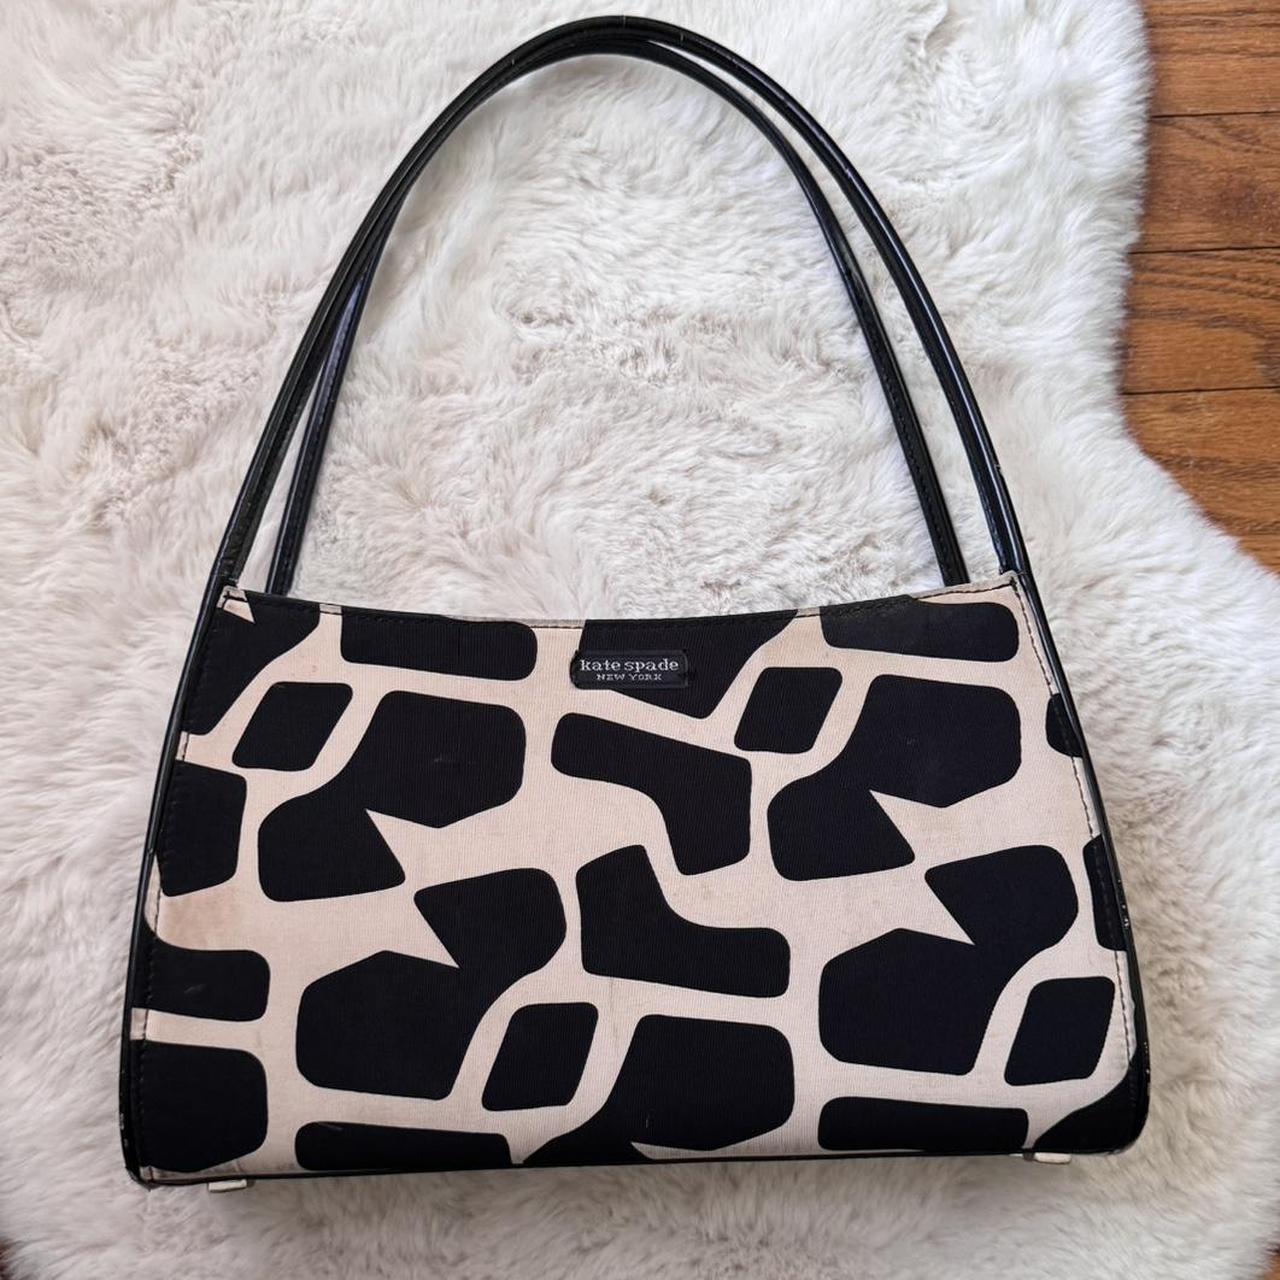 When I was 12 I wanted a leopard print Kate Spade purse so badly I used my  dial up internet to go onto @ebay and bid on one which my mom ... |  Instagram